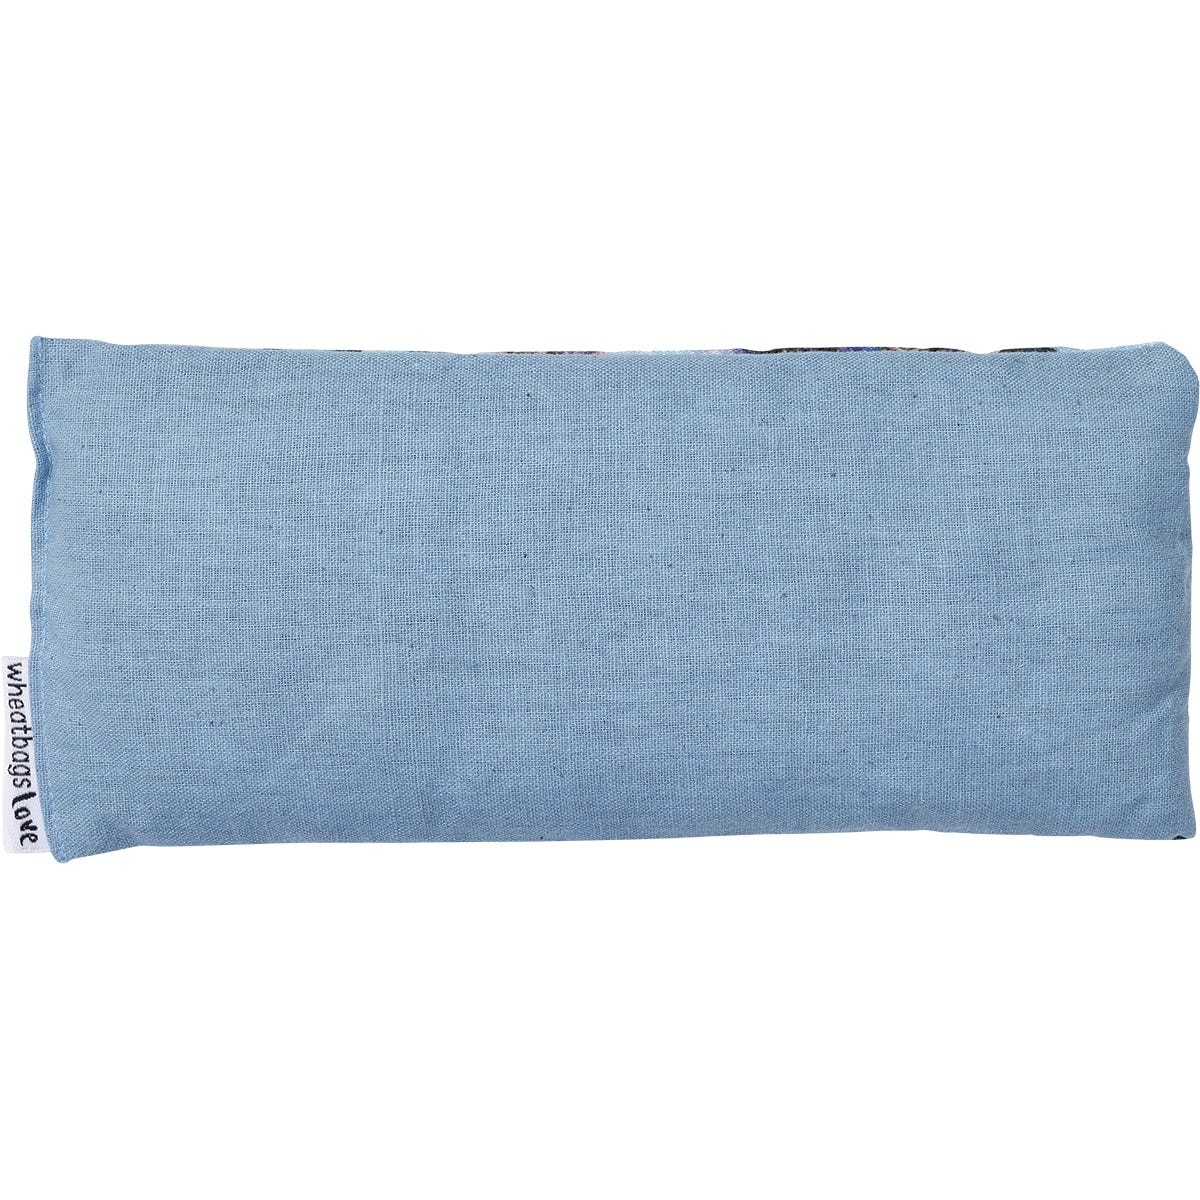 Wheatbags Love Eyepillow Blue Cockatoo Lavender Scented